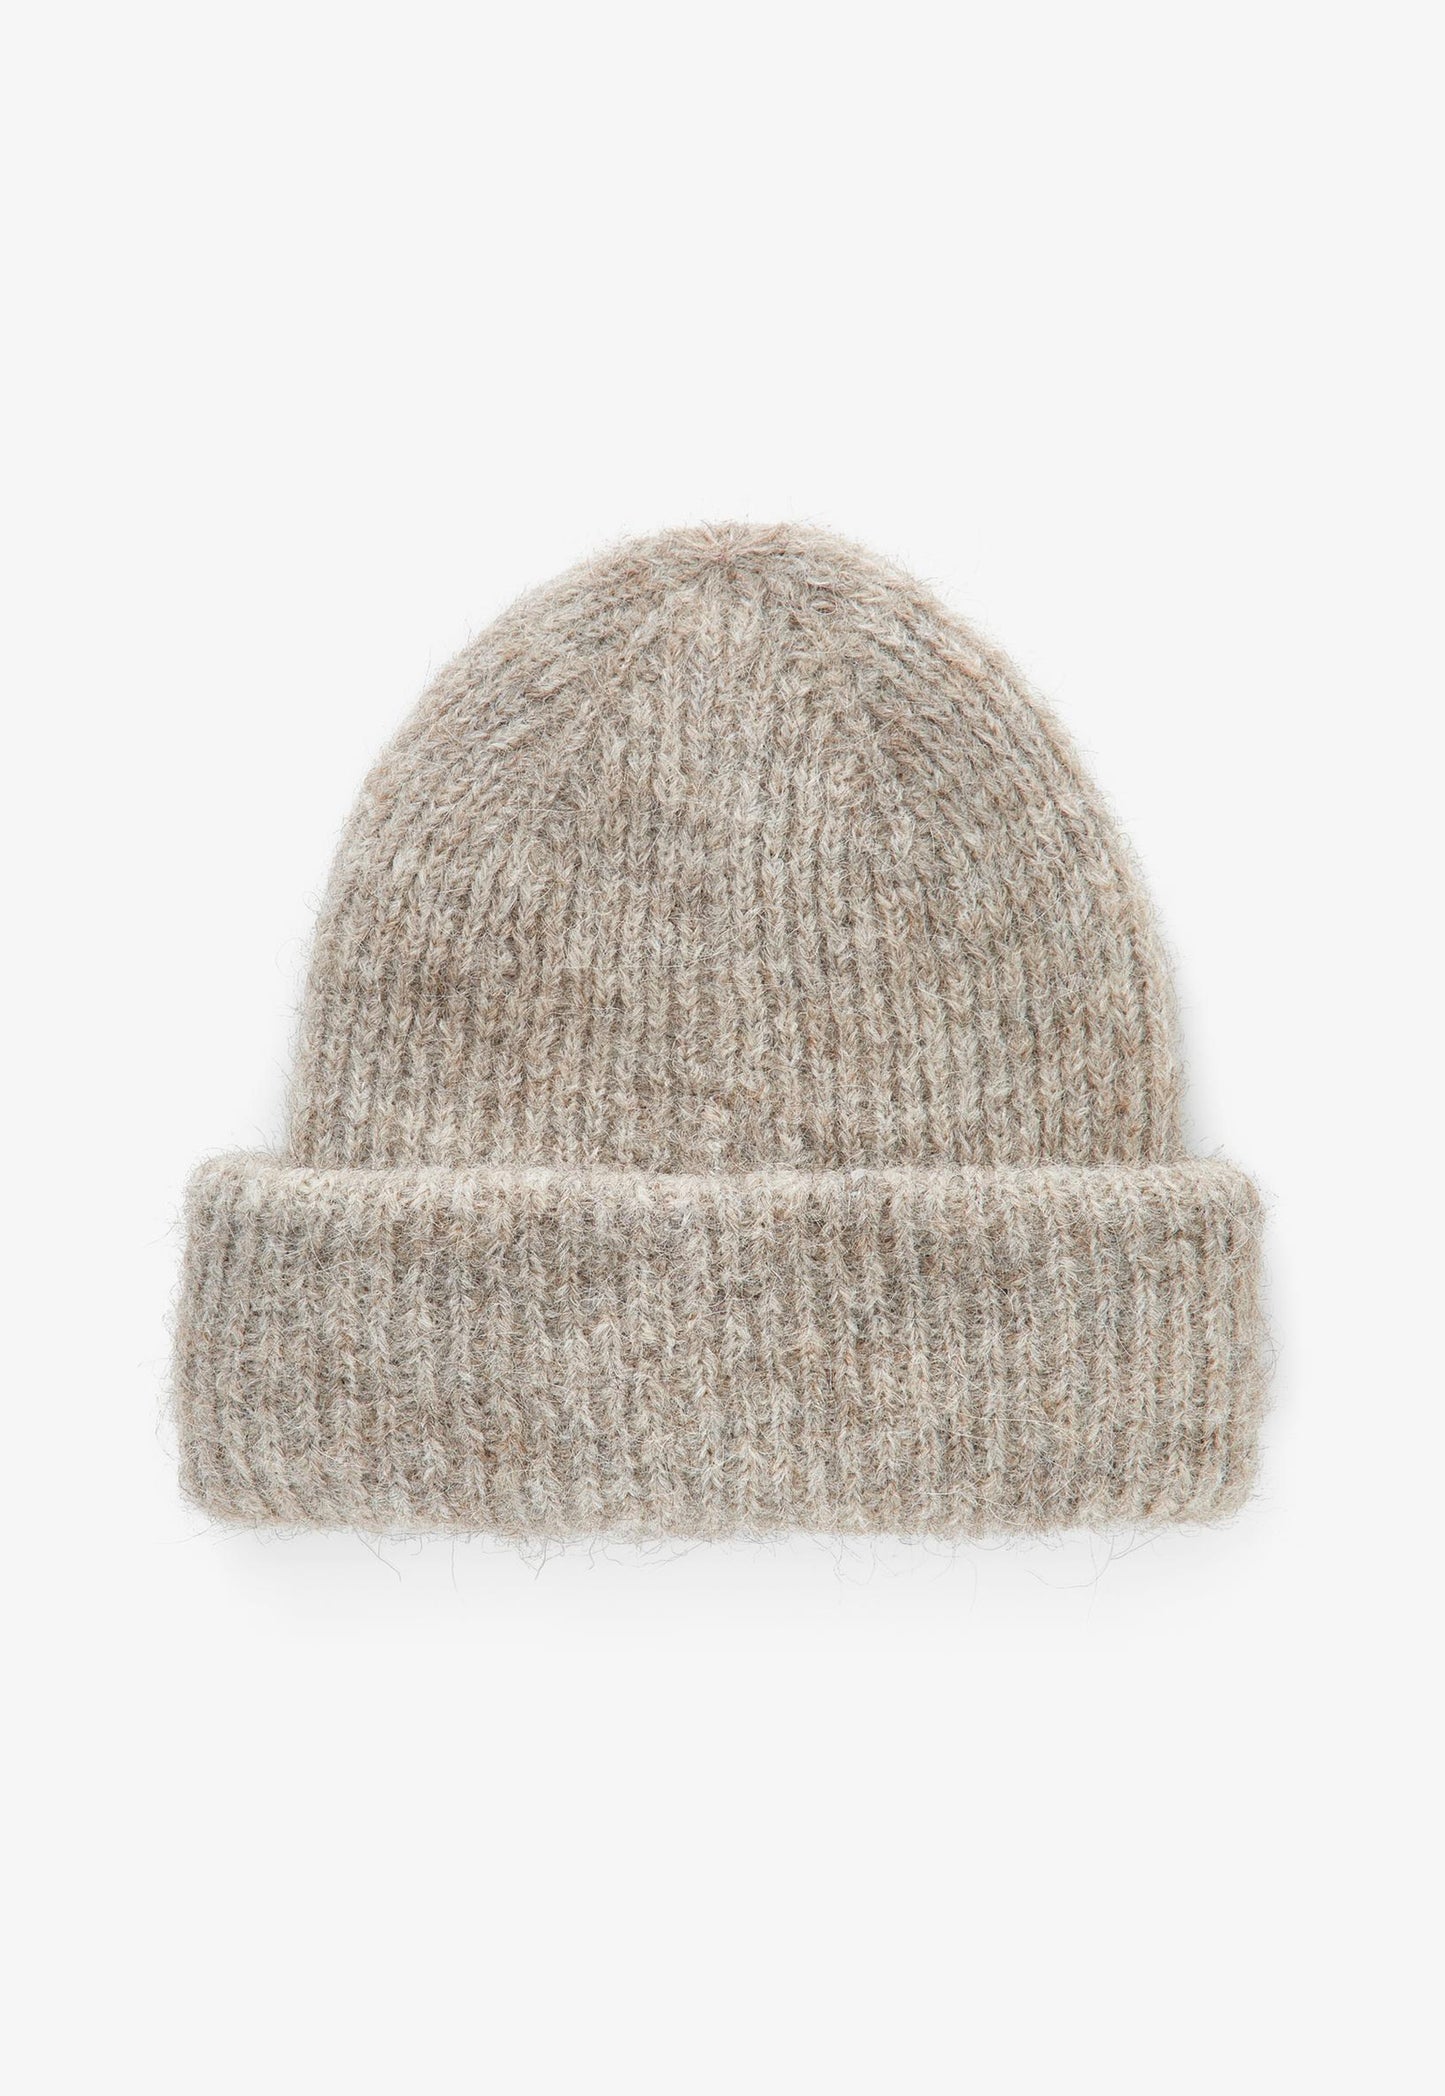 PIECES Fluffy Knit Ribbed Turn Up Beanie Hat in Beige - vietnamzoom